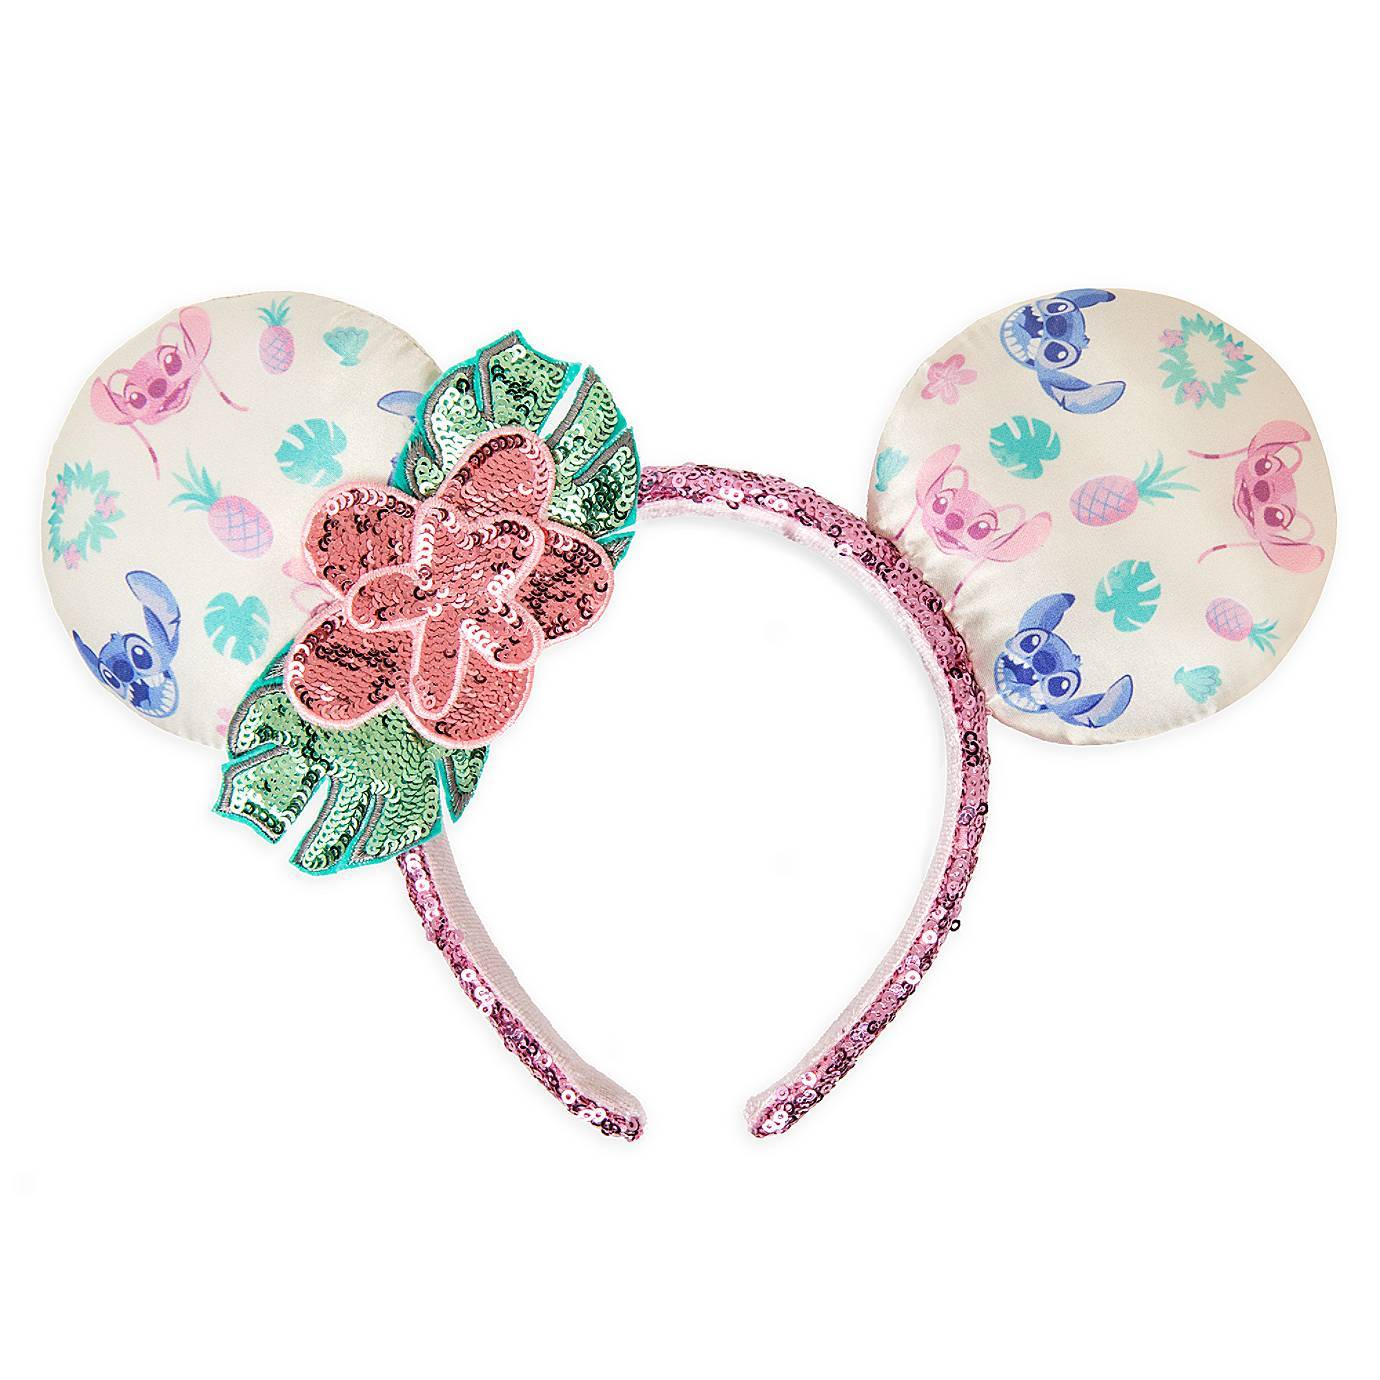 New Stitch Ear Headband Spotted At Disney Springs!